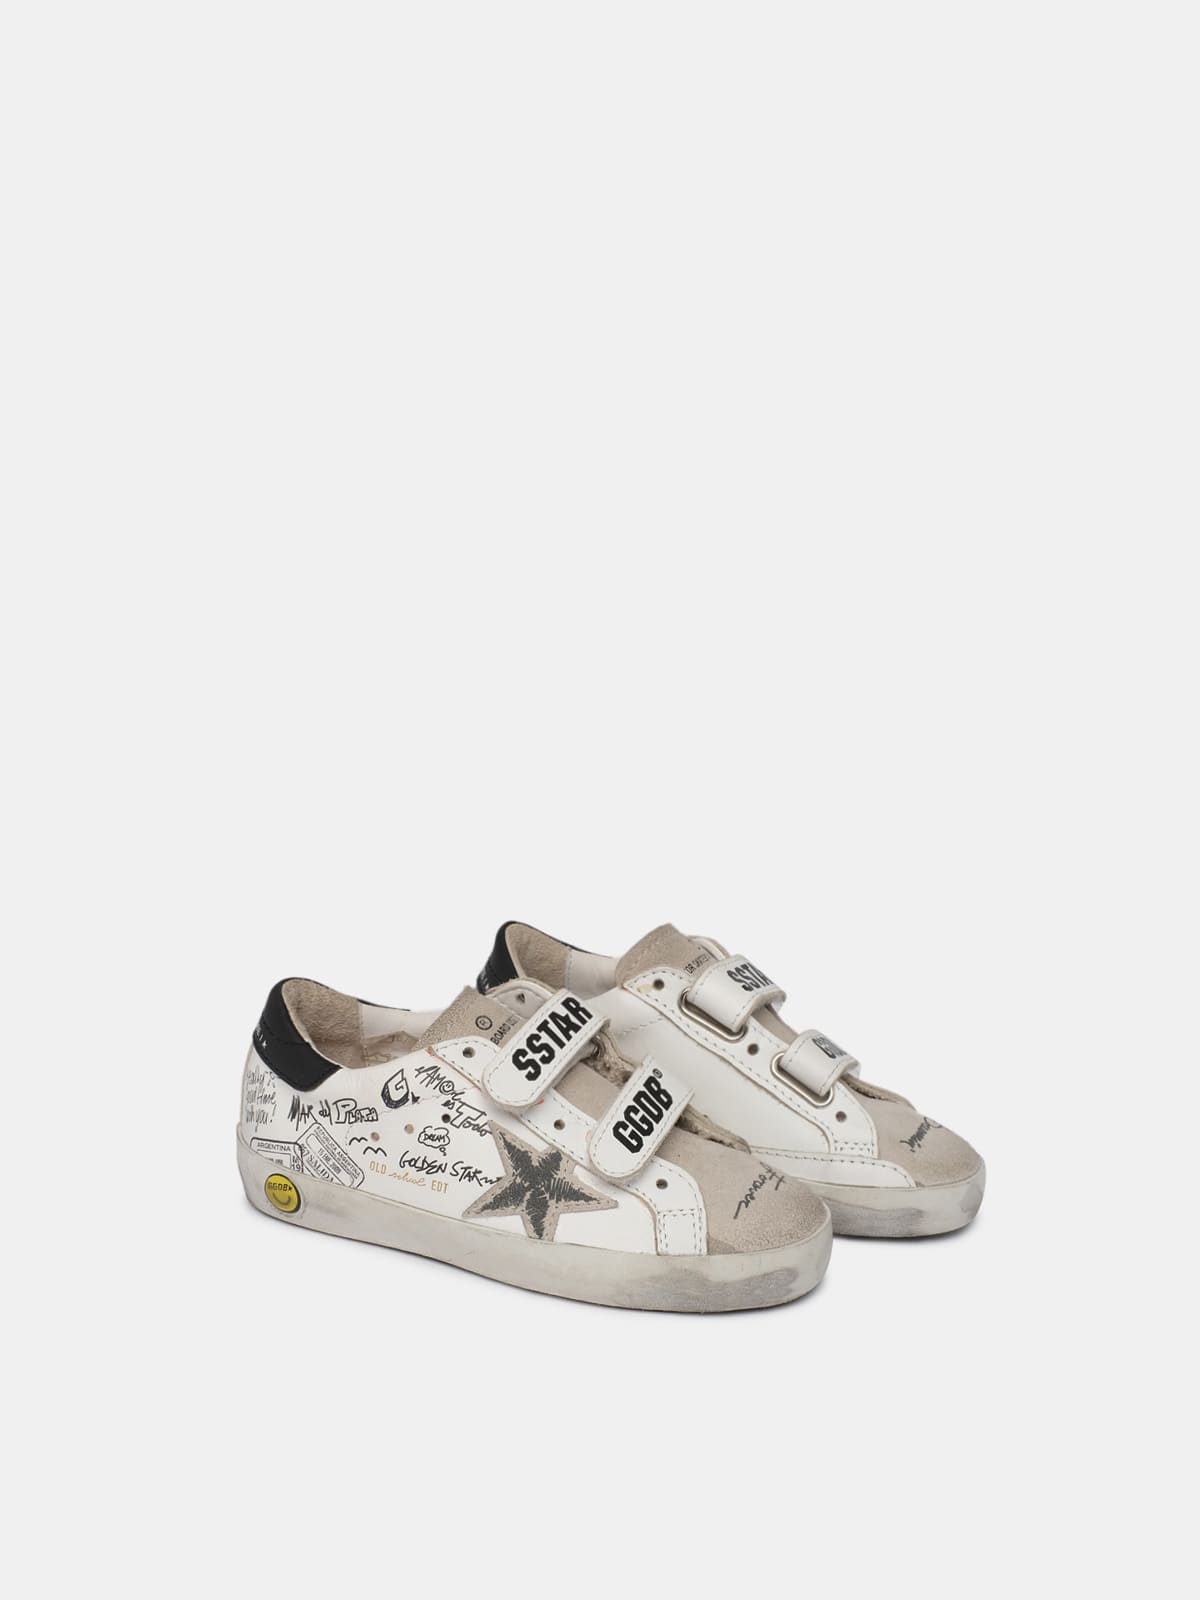 Francy sneakers with fluorescent laces and drawings on the upper ...